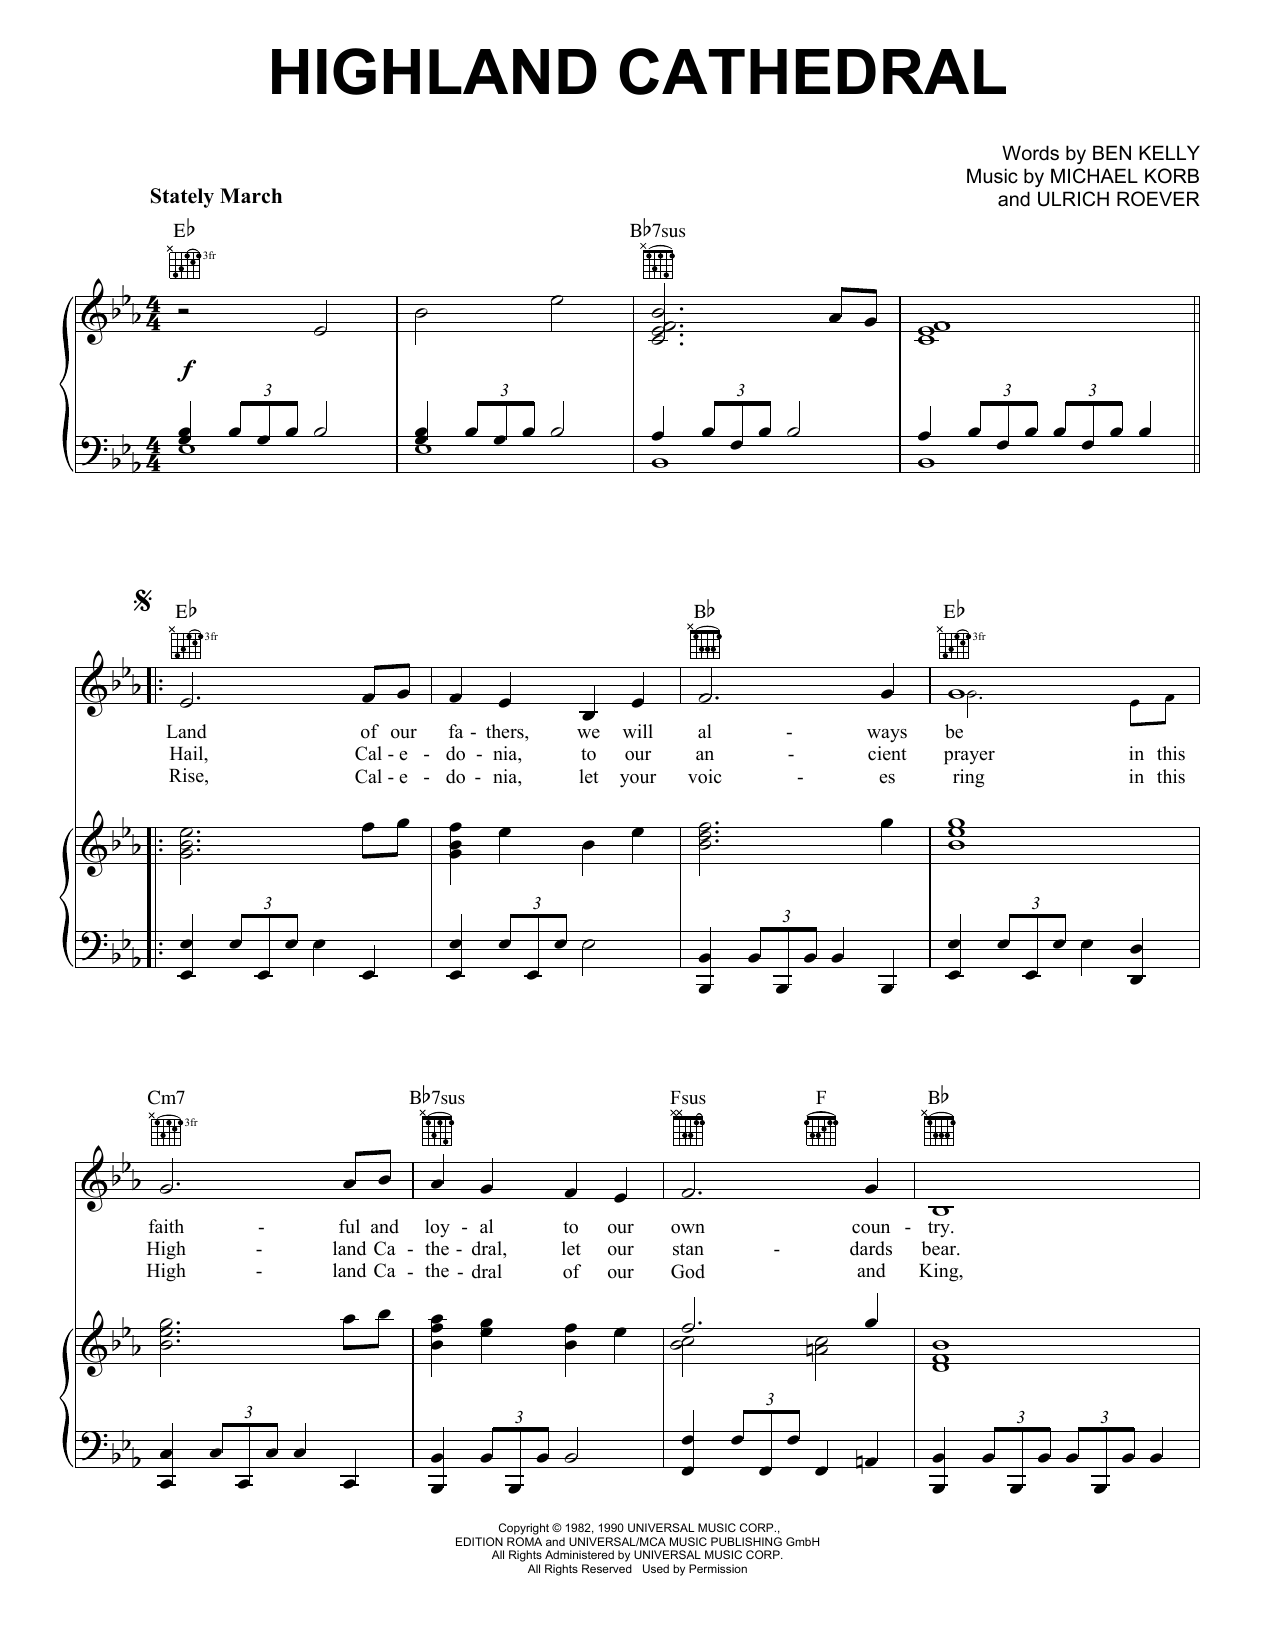 Download Michael Korb Highland Cathedral Sheet Music